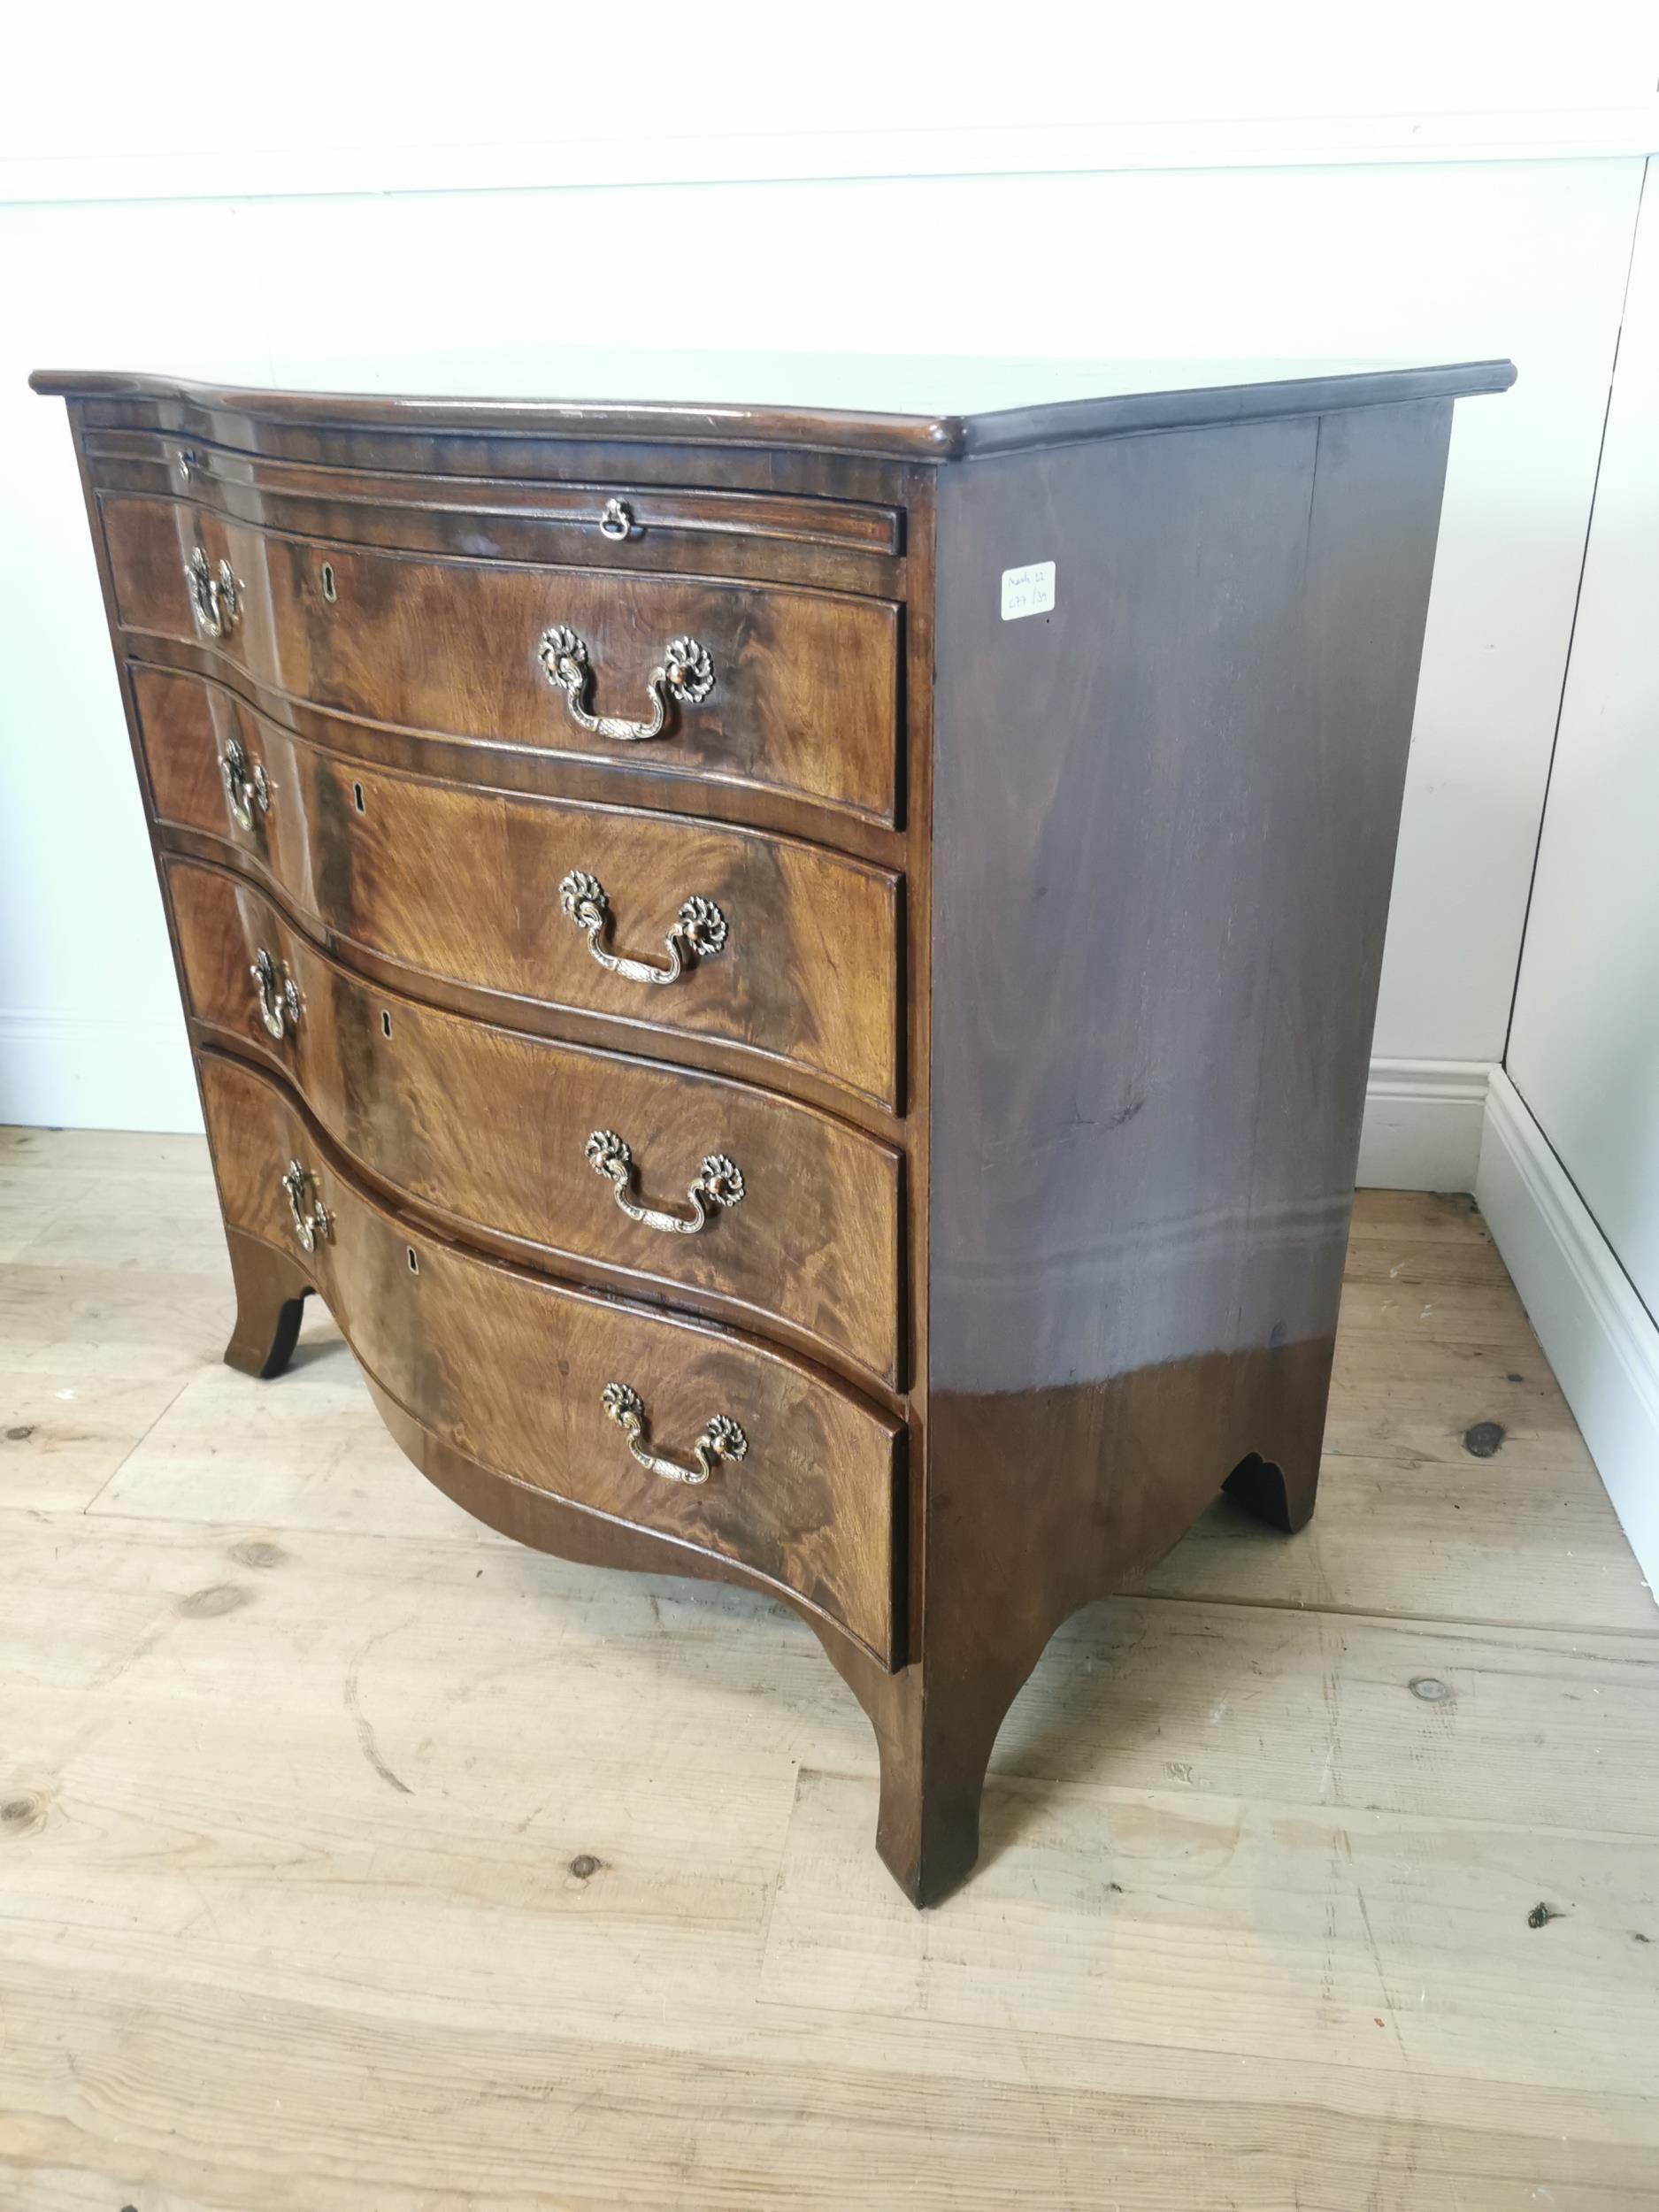 Good quality Edwardian serpentine fronted chest of drawers with four graduated drawers with brushing - Image 4 of 6